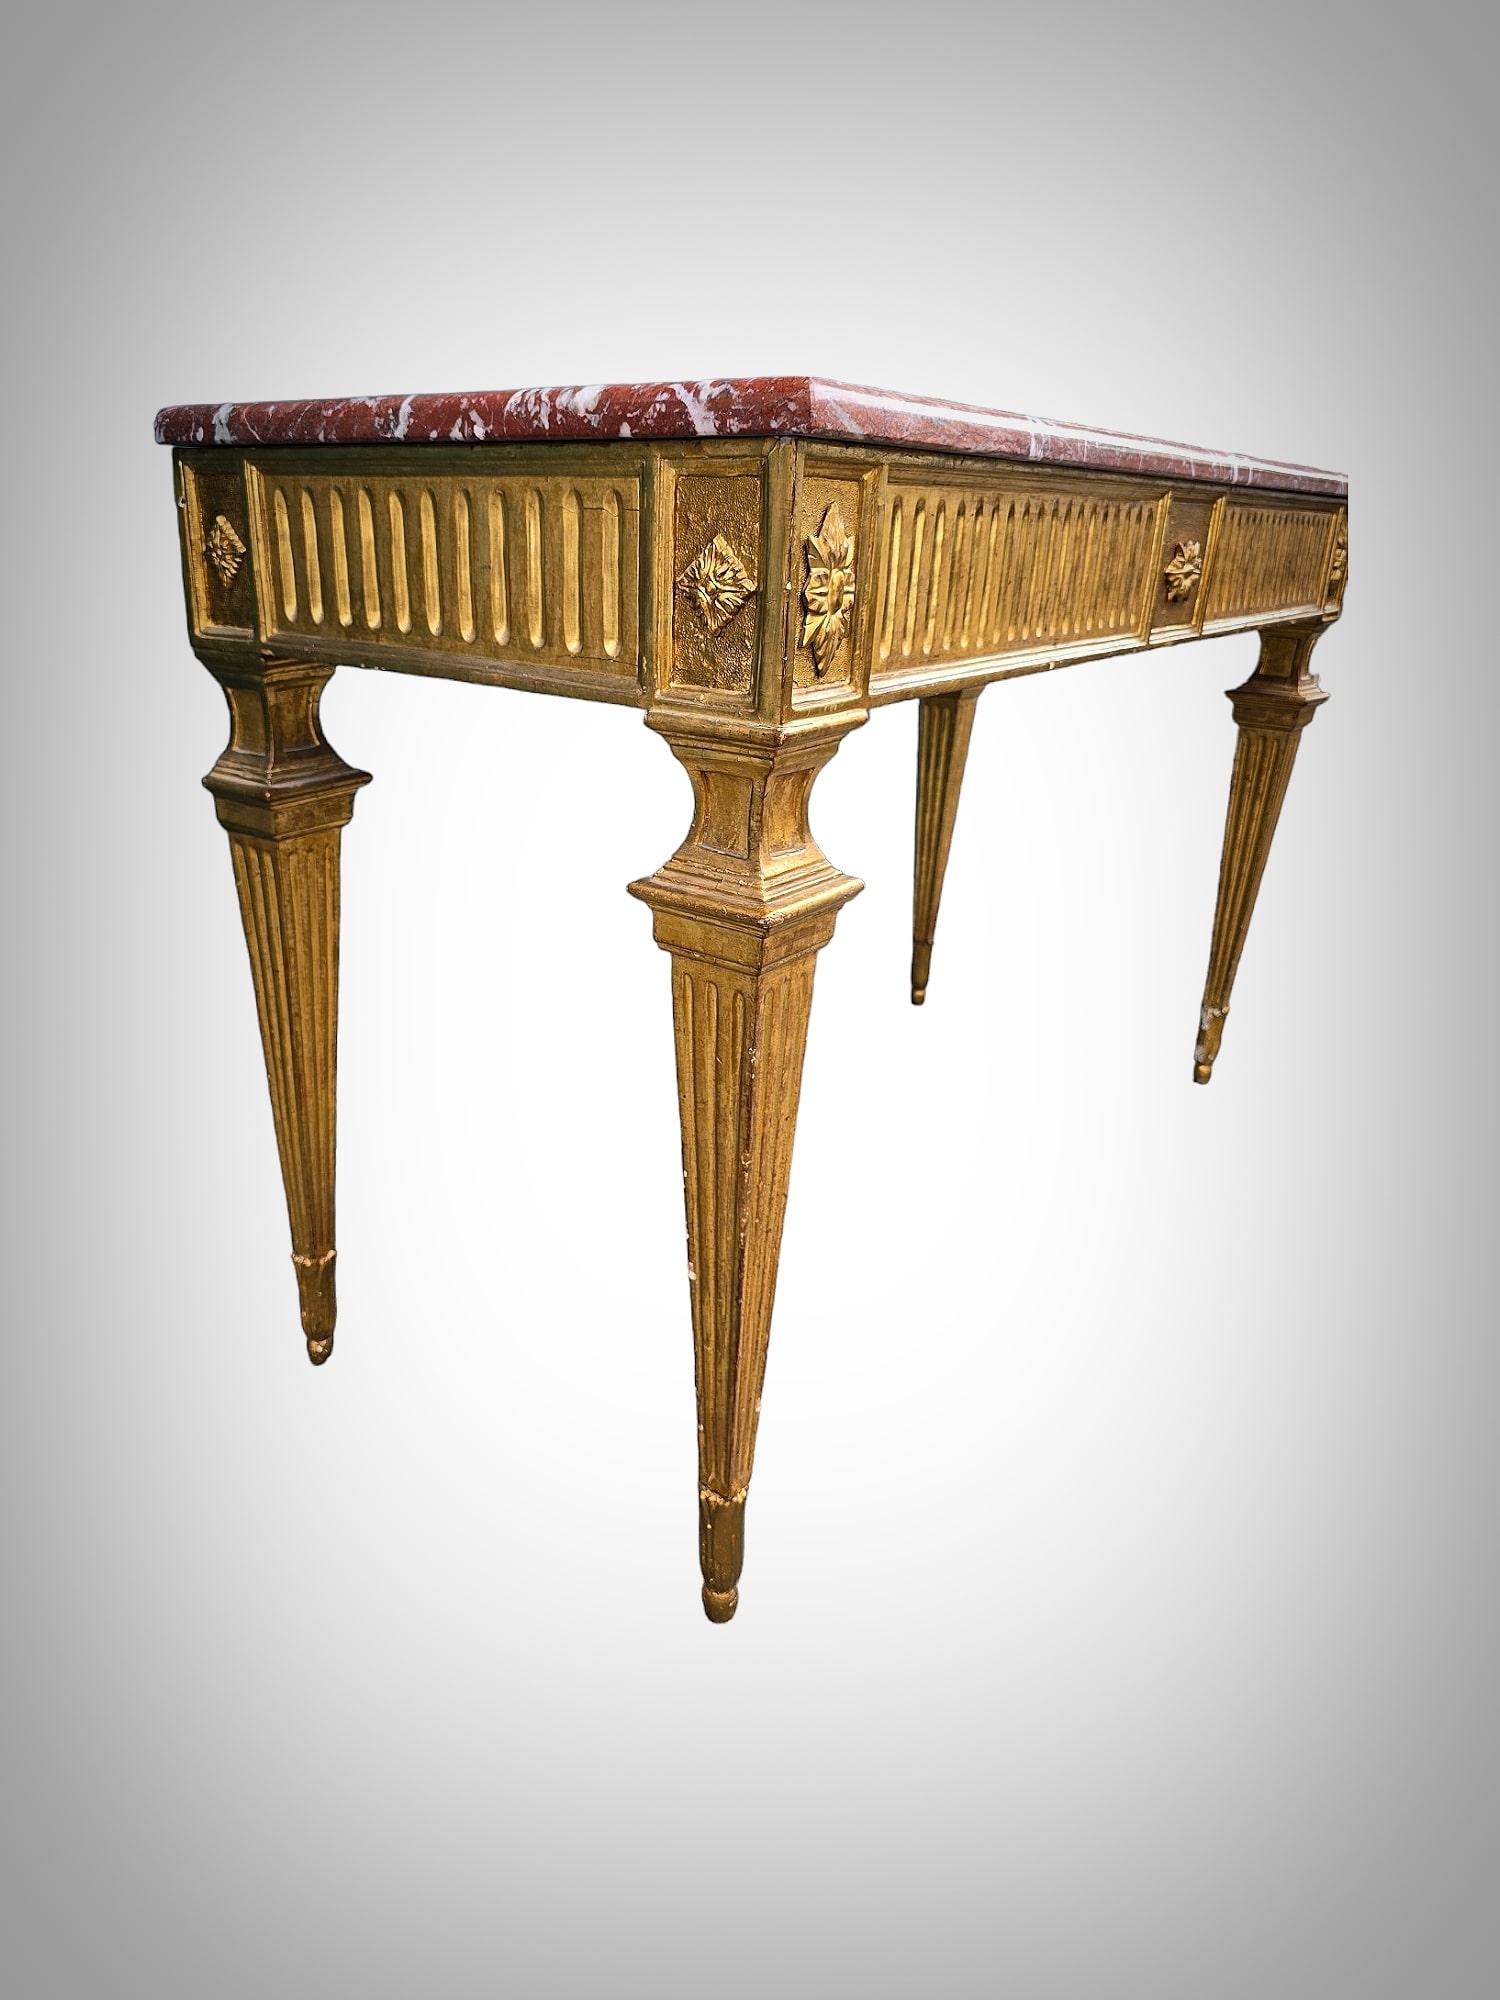 Louis XVI Period Gilded Carved Wood Console Table 18 th For Sale 4